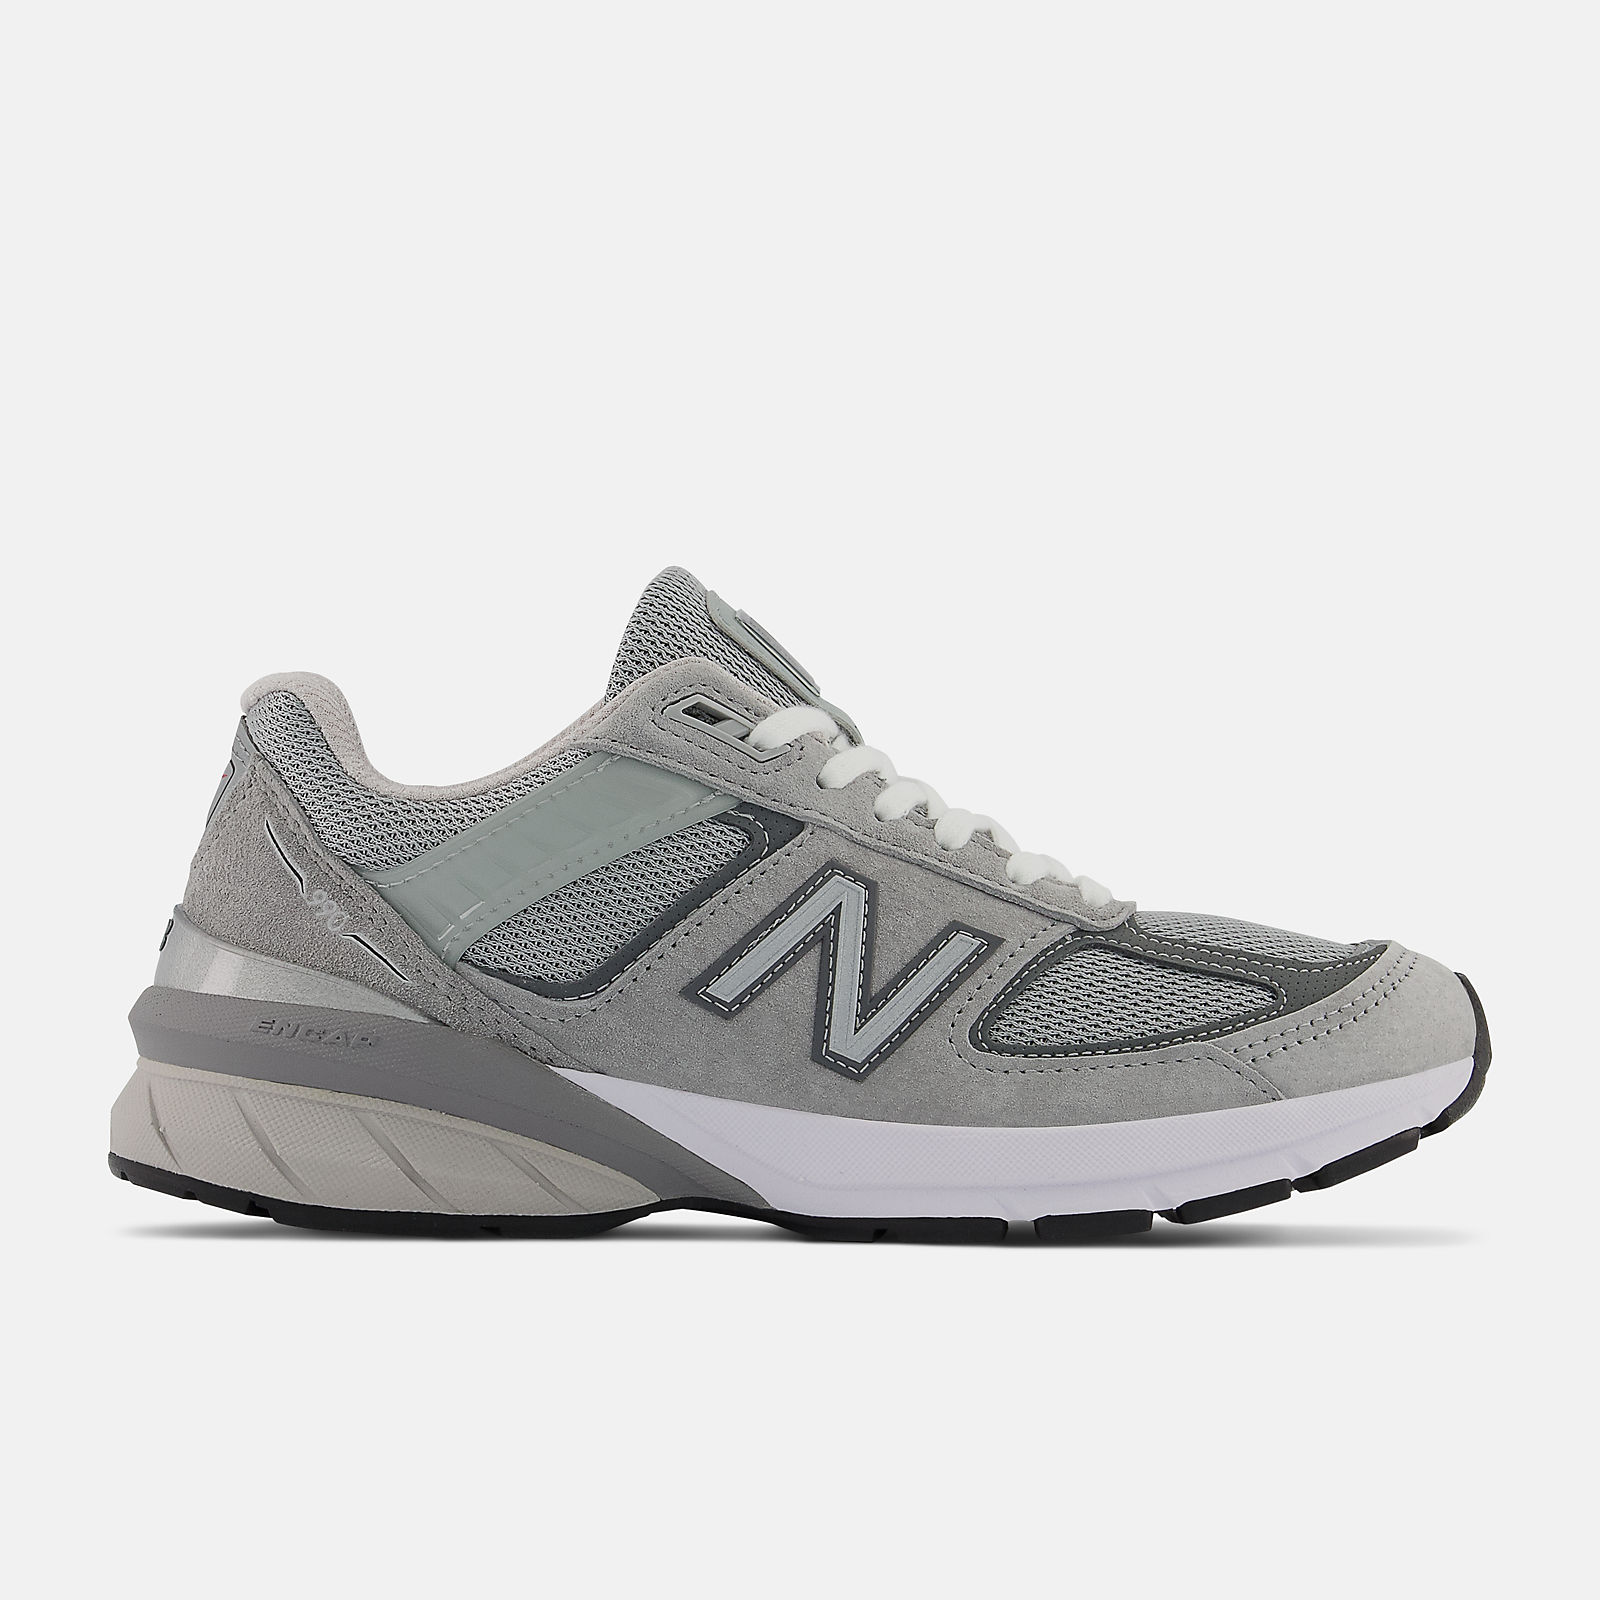 New Balance Women's Blue Made In US 990 v5 Sneakers